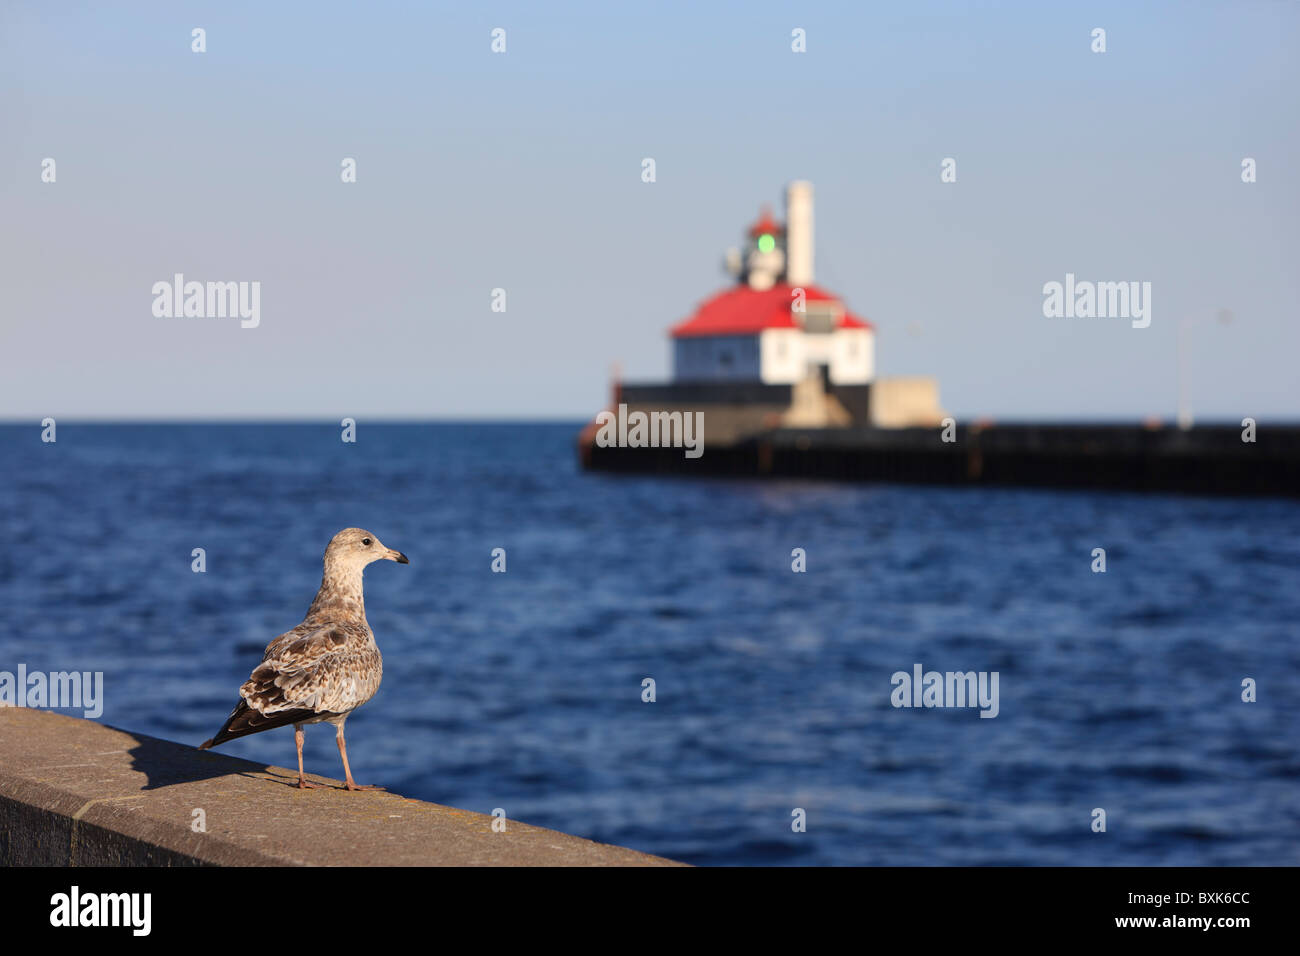 A gull sits on the north pier along the Duluth, MN ship canal on Lake Superior with the south breakwater lighthouse in backgrnd. Stock Photo